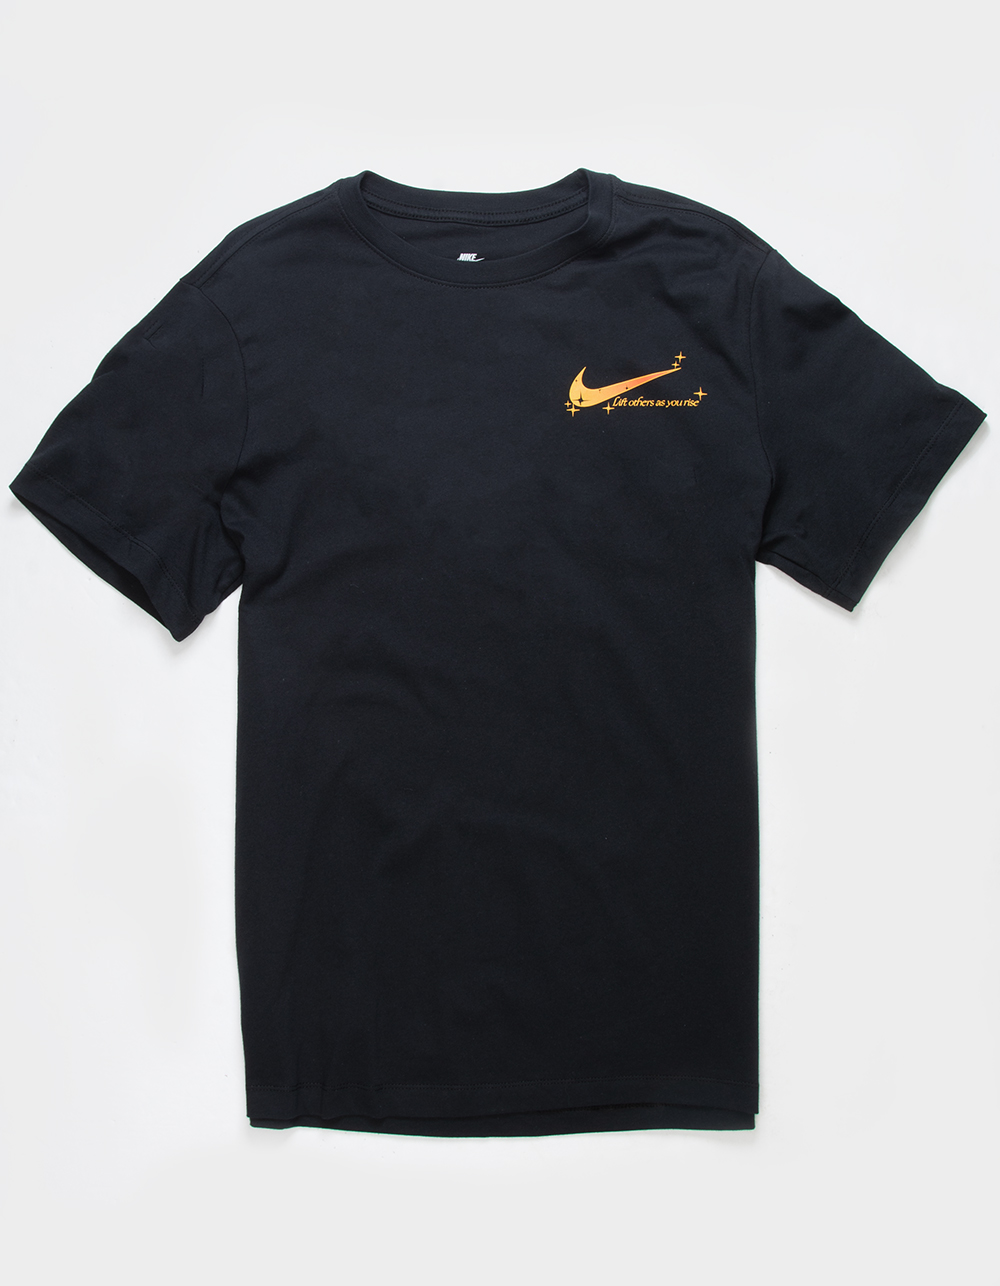 NIKE Lift Others As You Rise Mens Tee - BLACK | Tillys